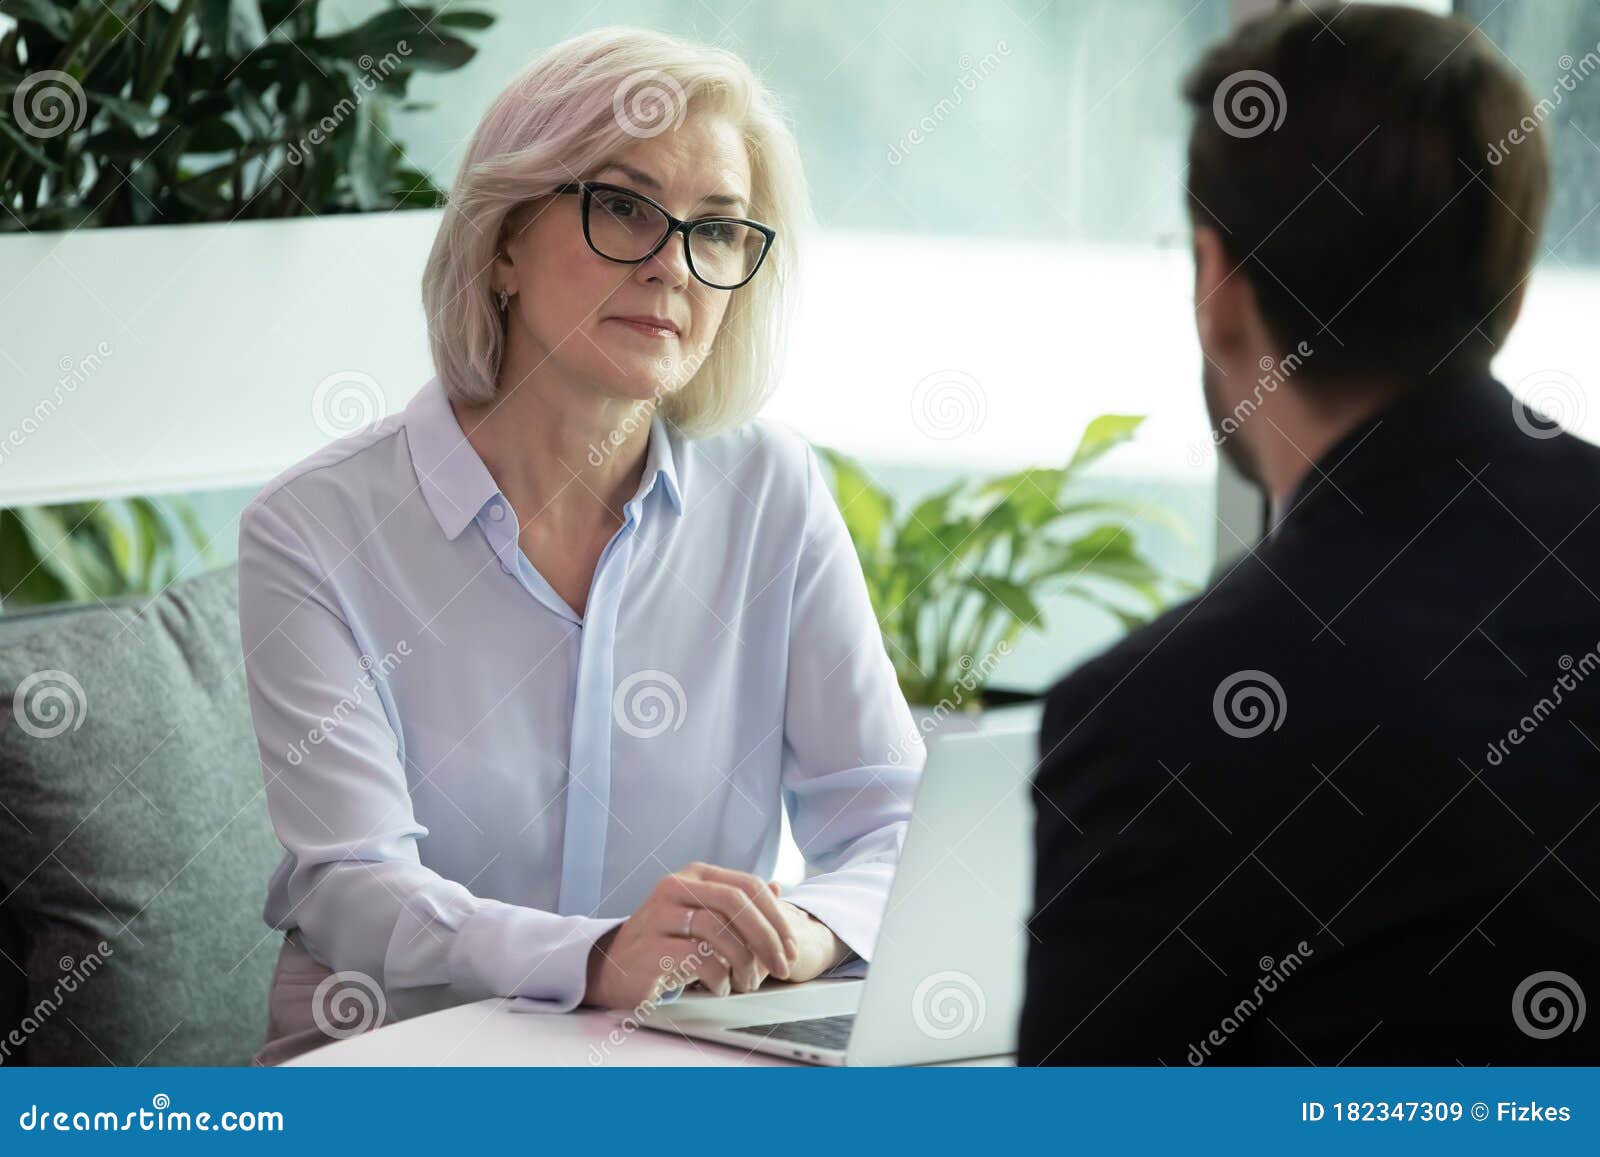 middle aged hr manager listen male applicant during job interview